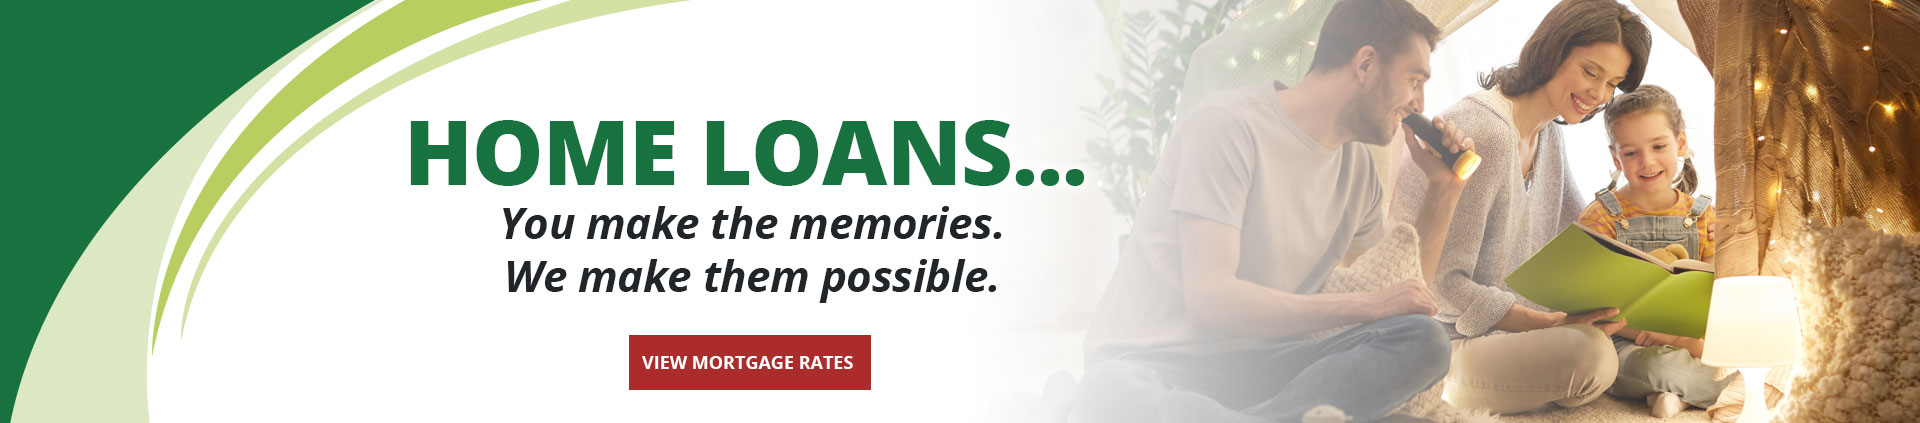 Home Loans - you make the memories.  We make them possible.  View mortgage rates